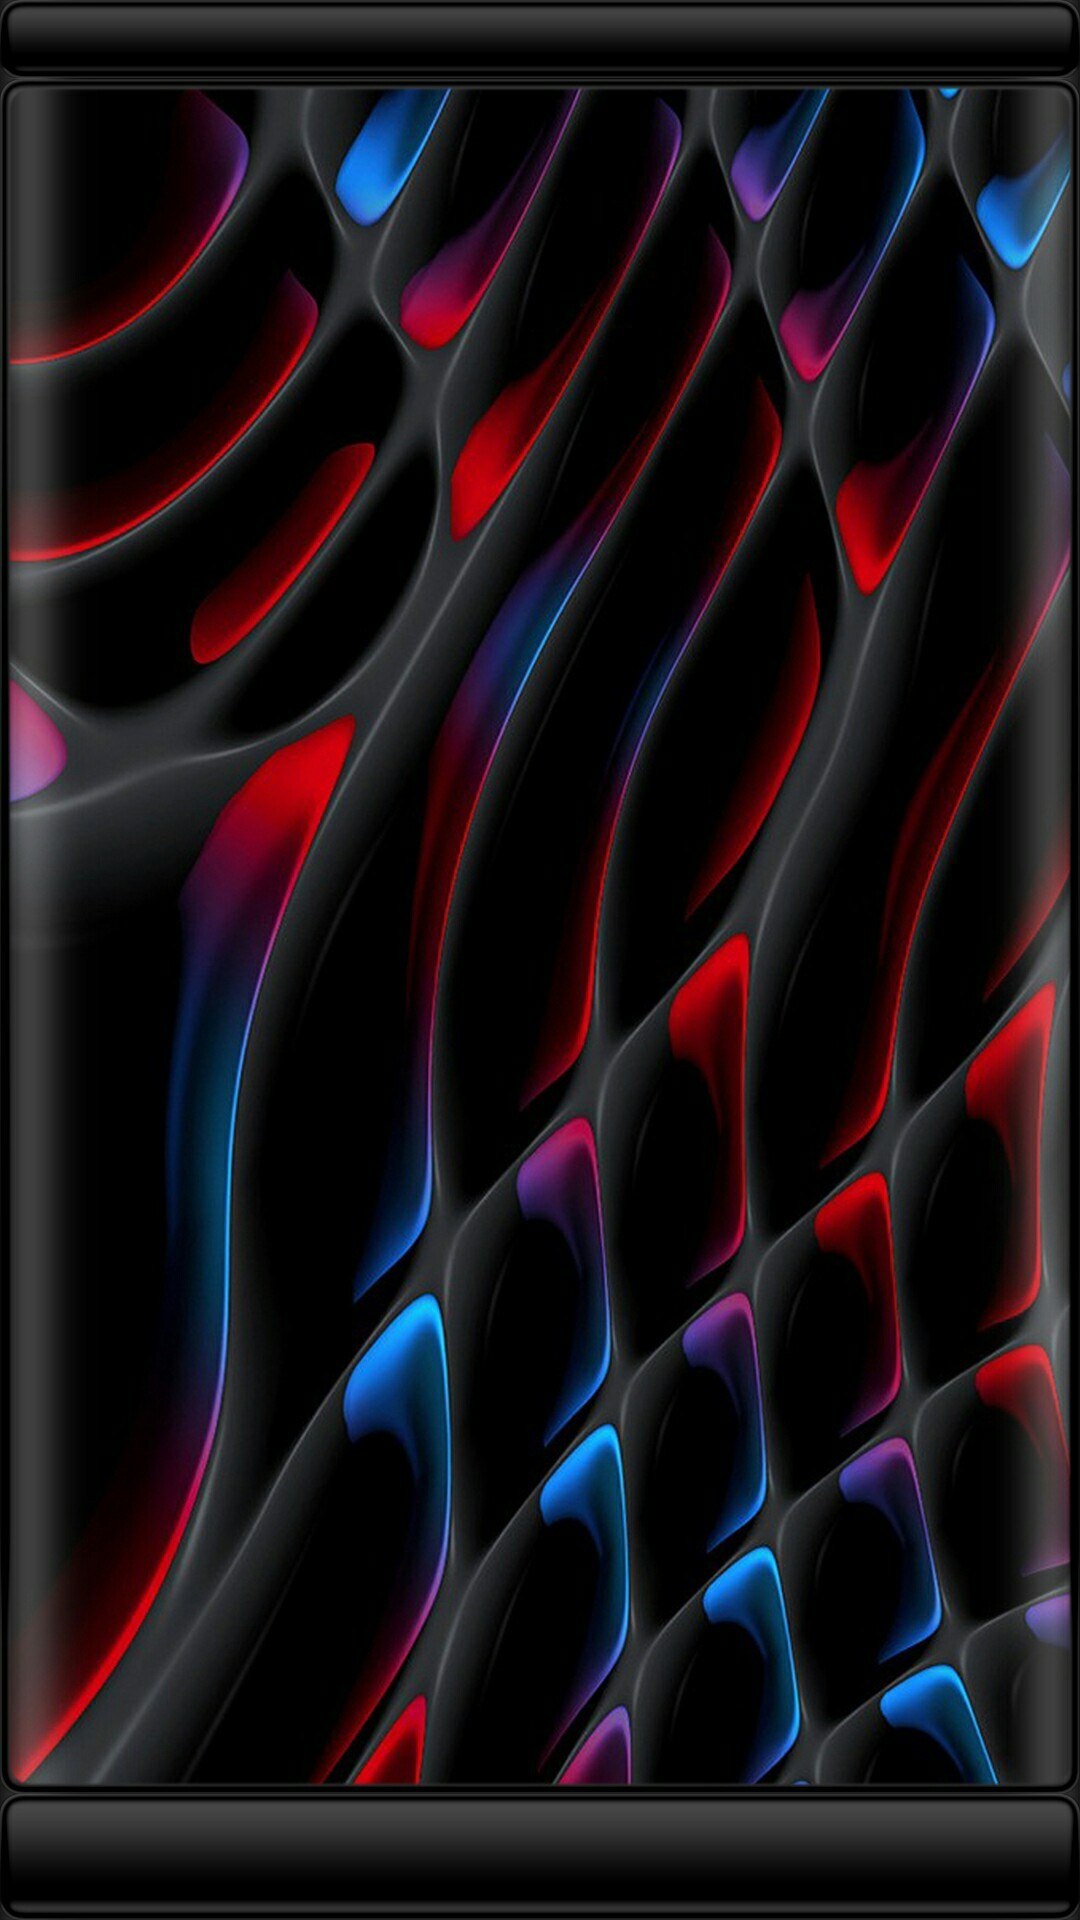 1080x1920 Purple Wallpaper, 3d Wallpaper, Cell Phone Wallpapers, Red Purple,  Smartphone, Clip Art, Templates, Backgrounds, Background Images